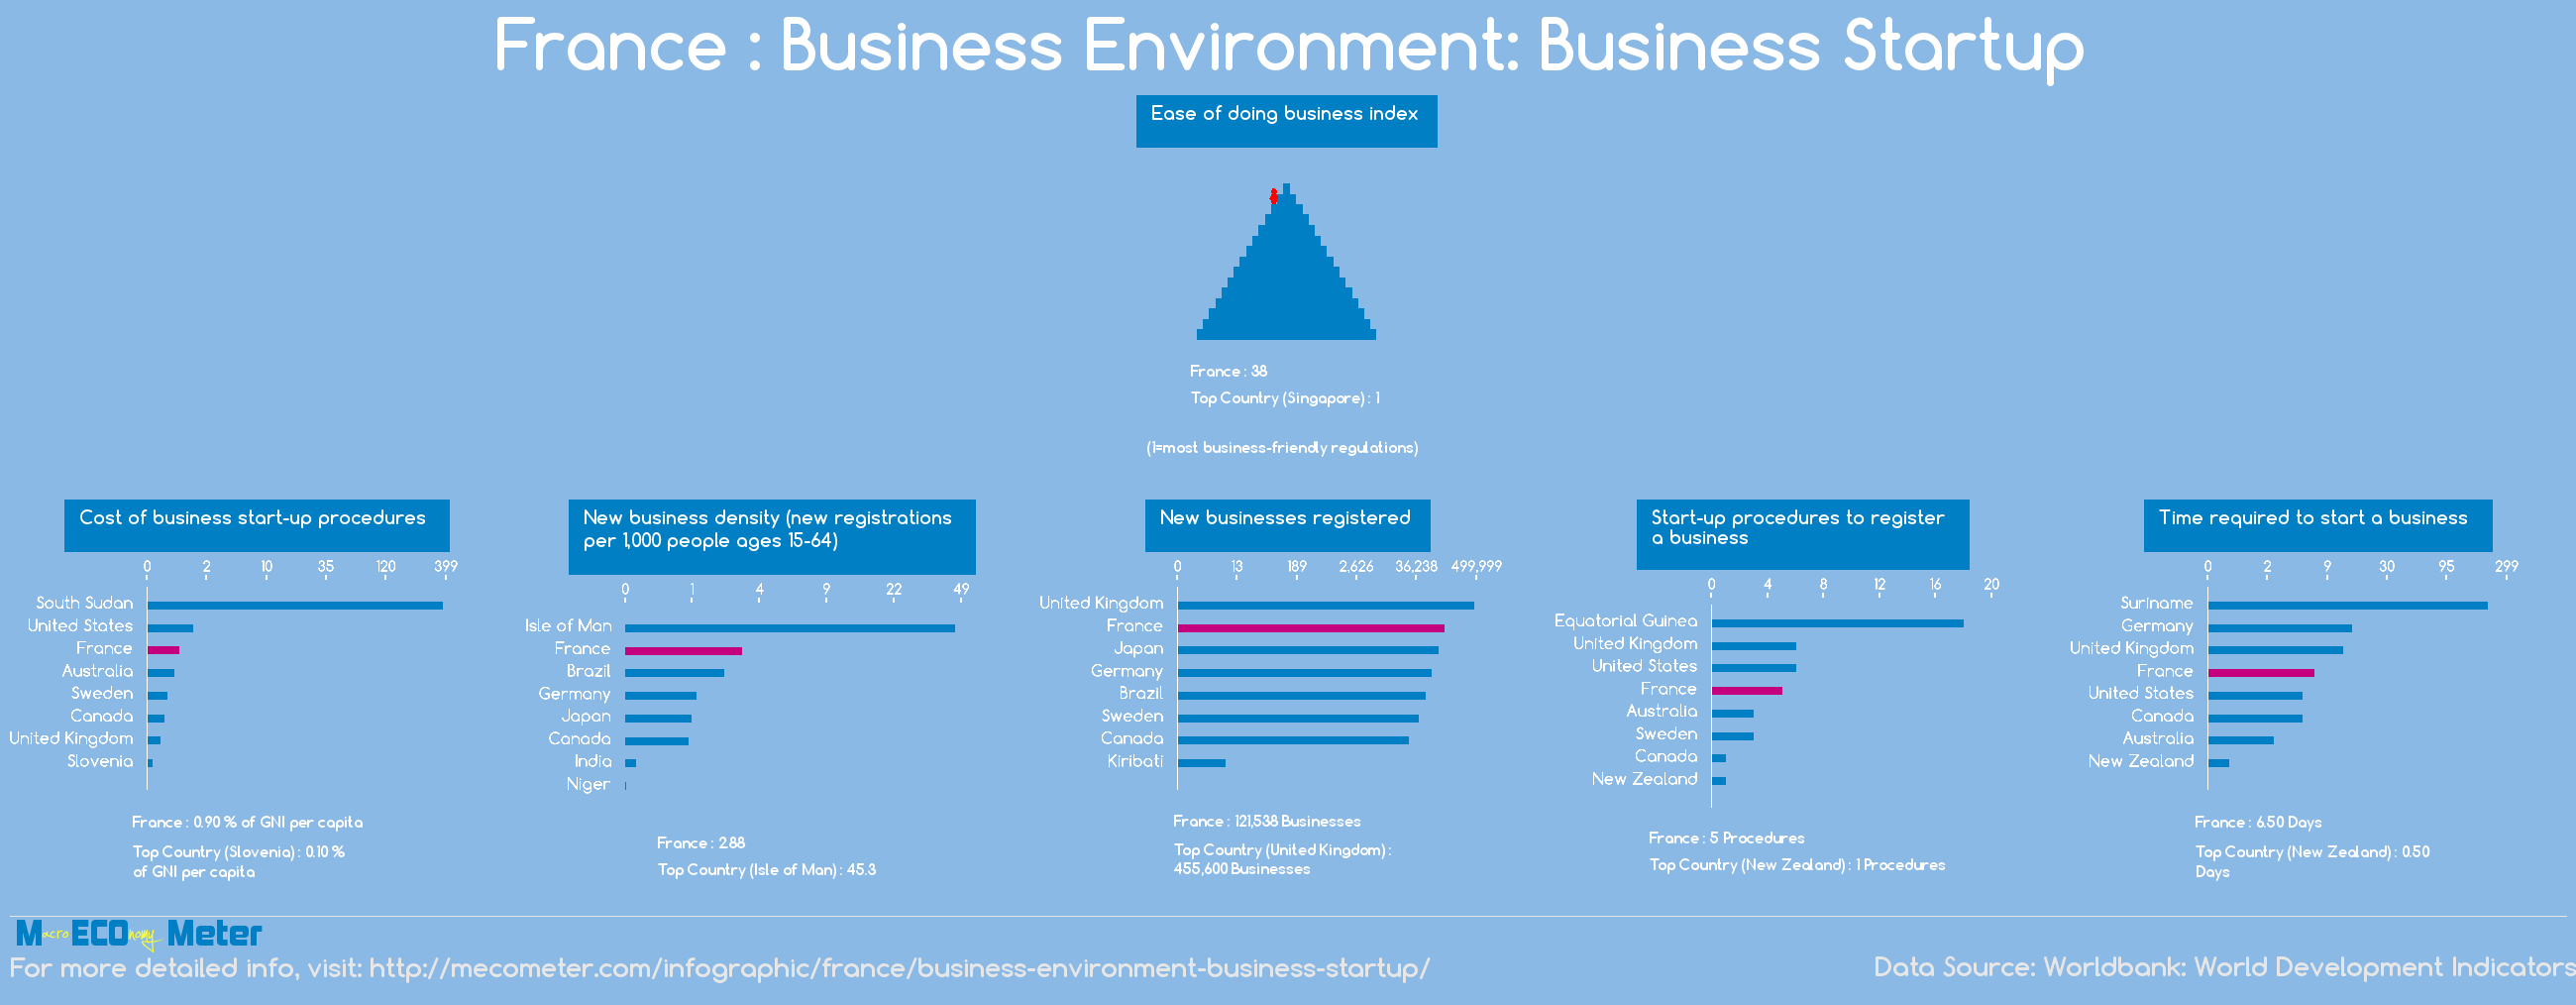 France : Business Environment: Business Startup